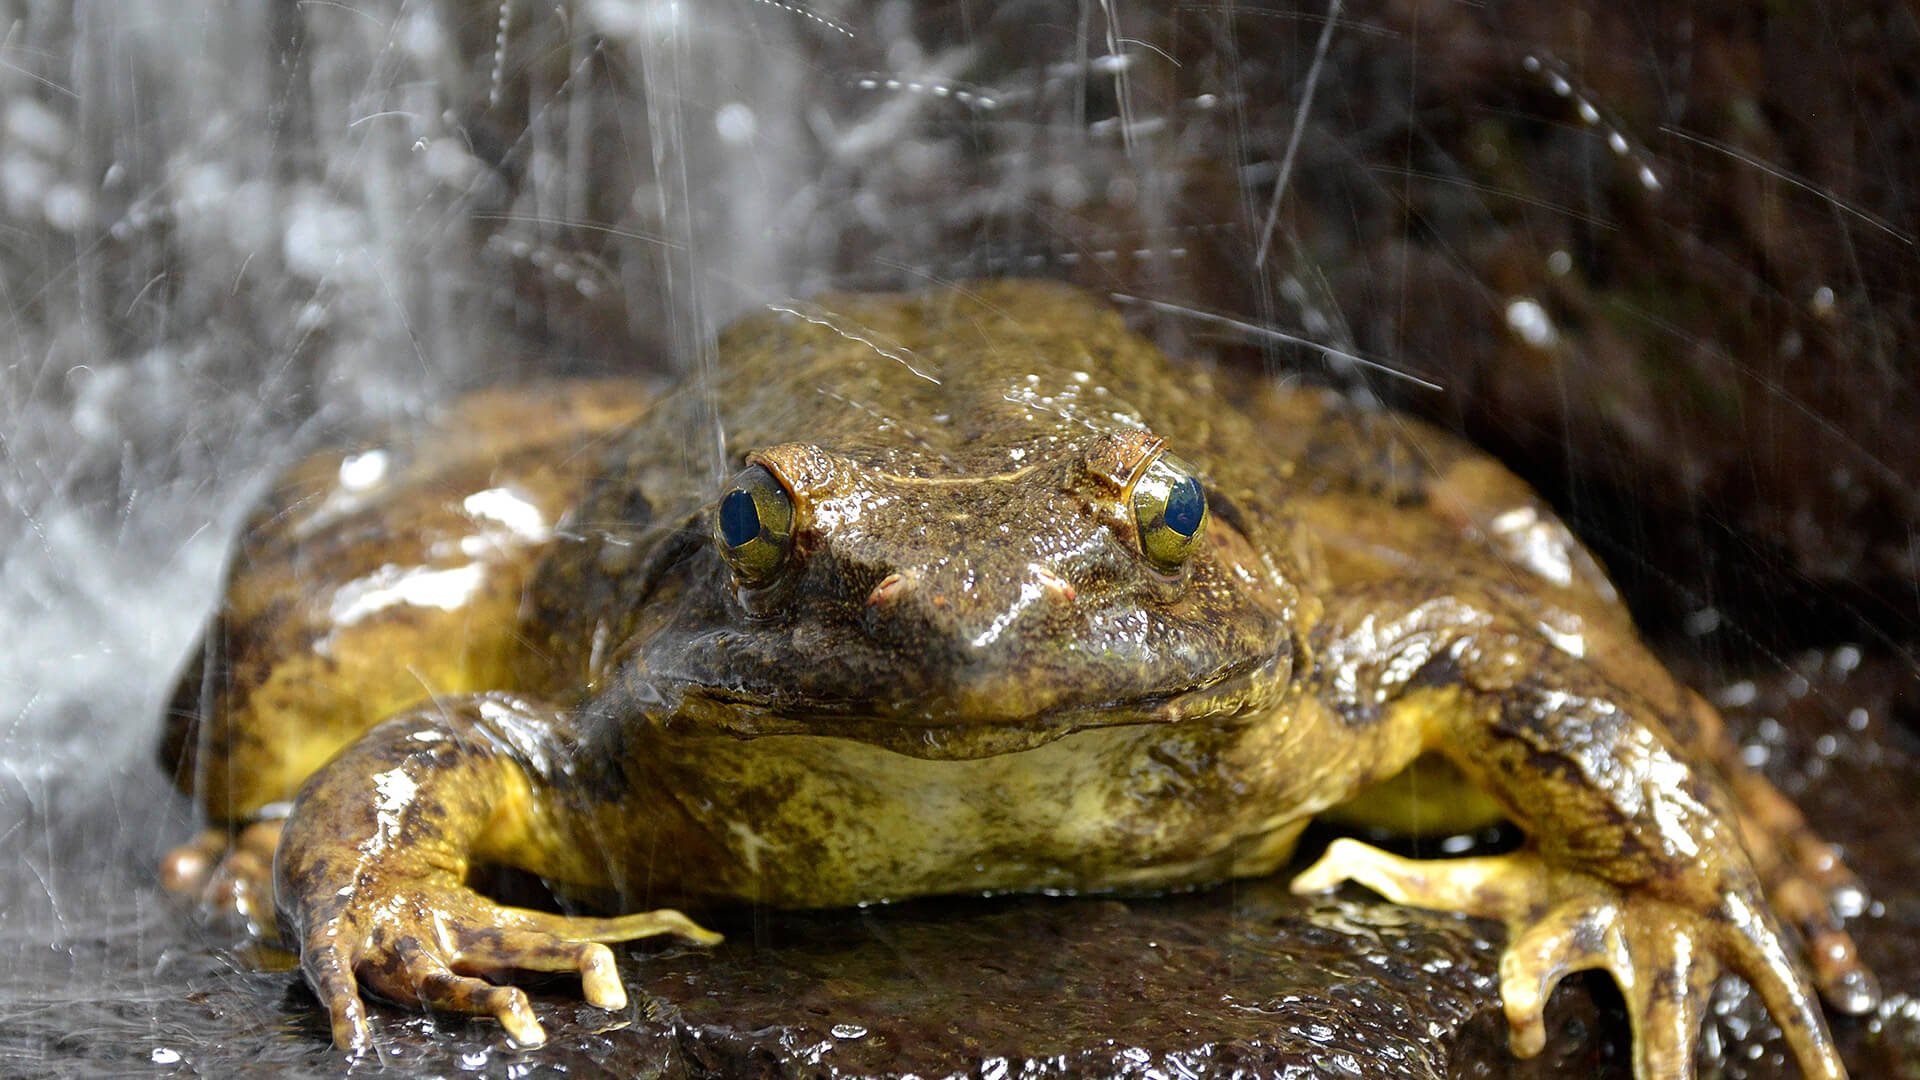 The goliath frog is normally found in and near fast-flowing rivers with sandy bottoms in the Middle African countries of Cameroon and Equatorial Guinea.